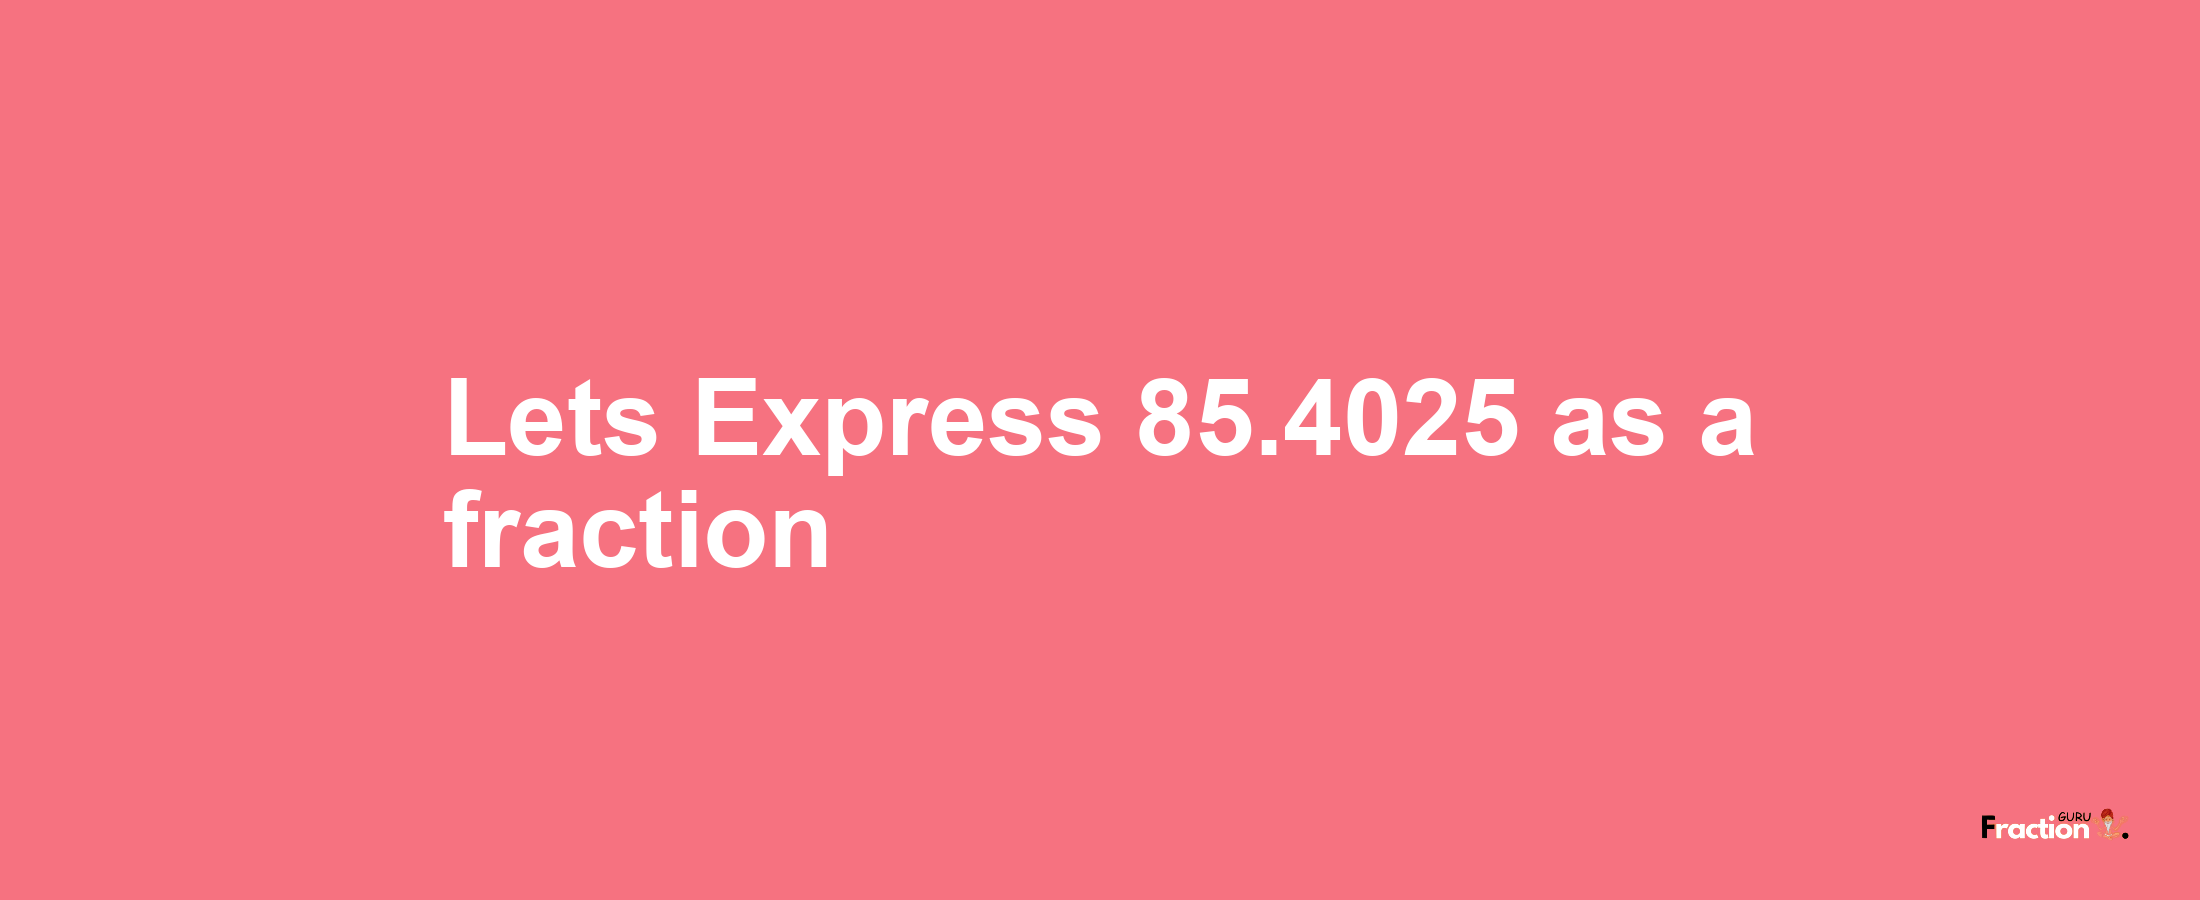 Lets Express 85.4025 as afraction